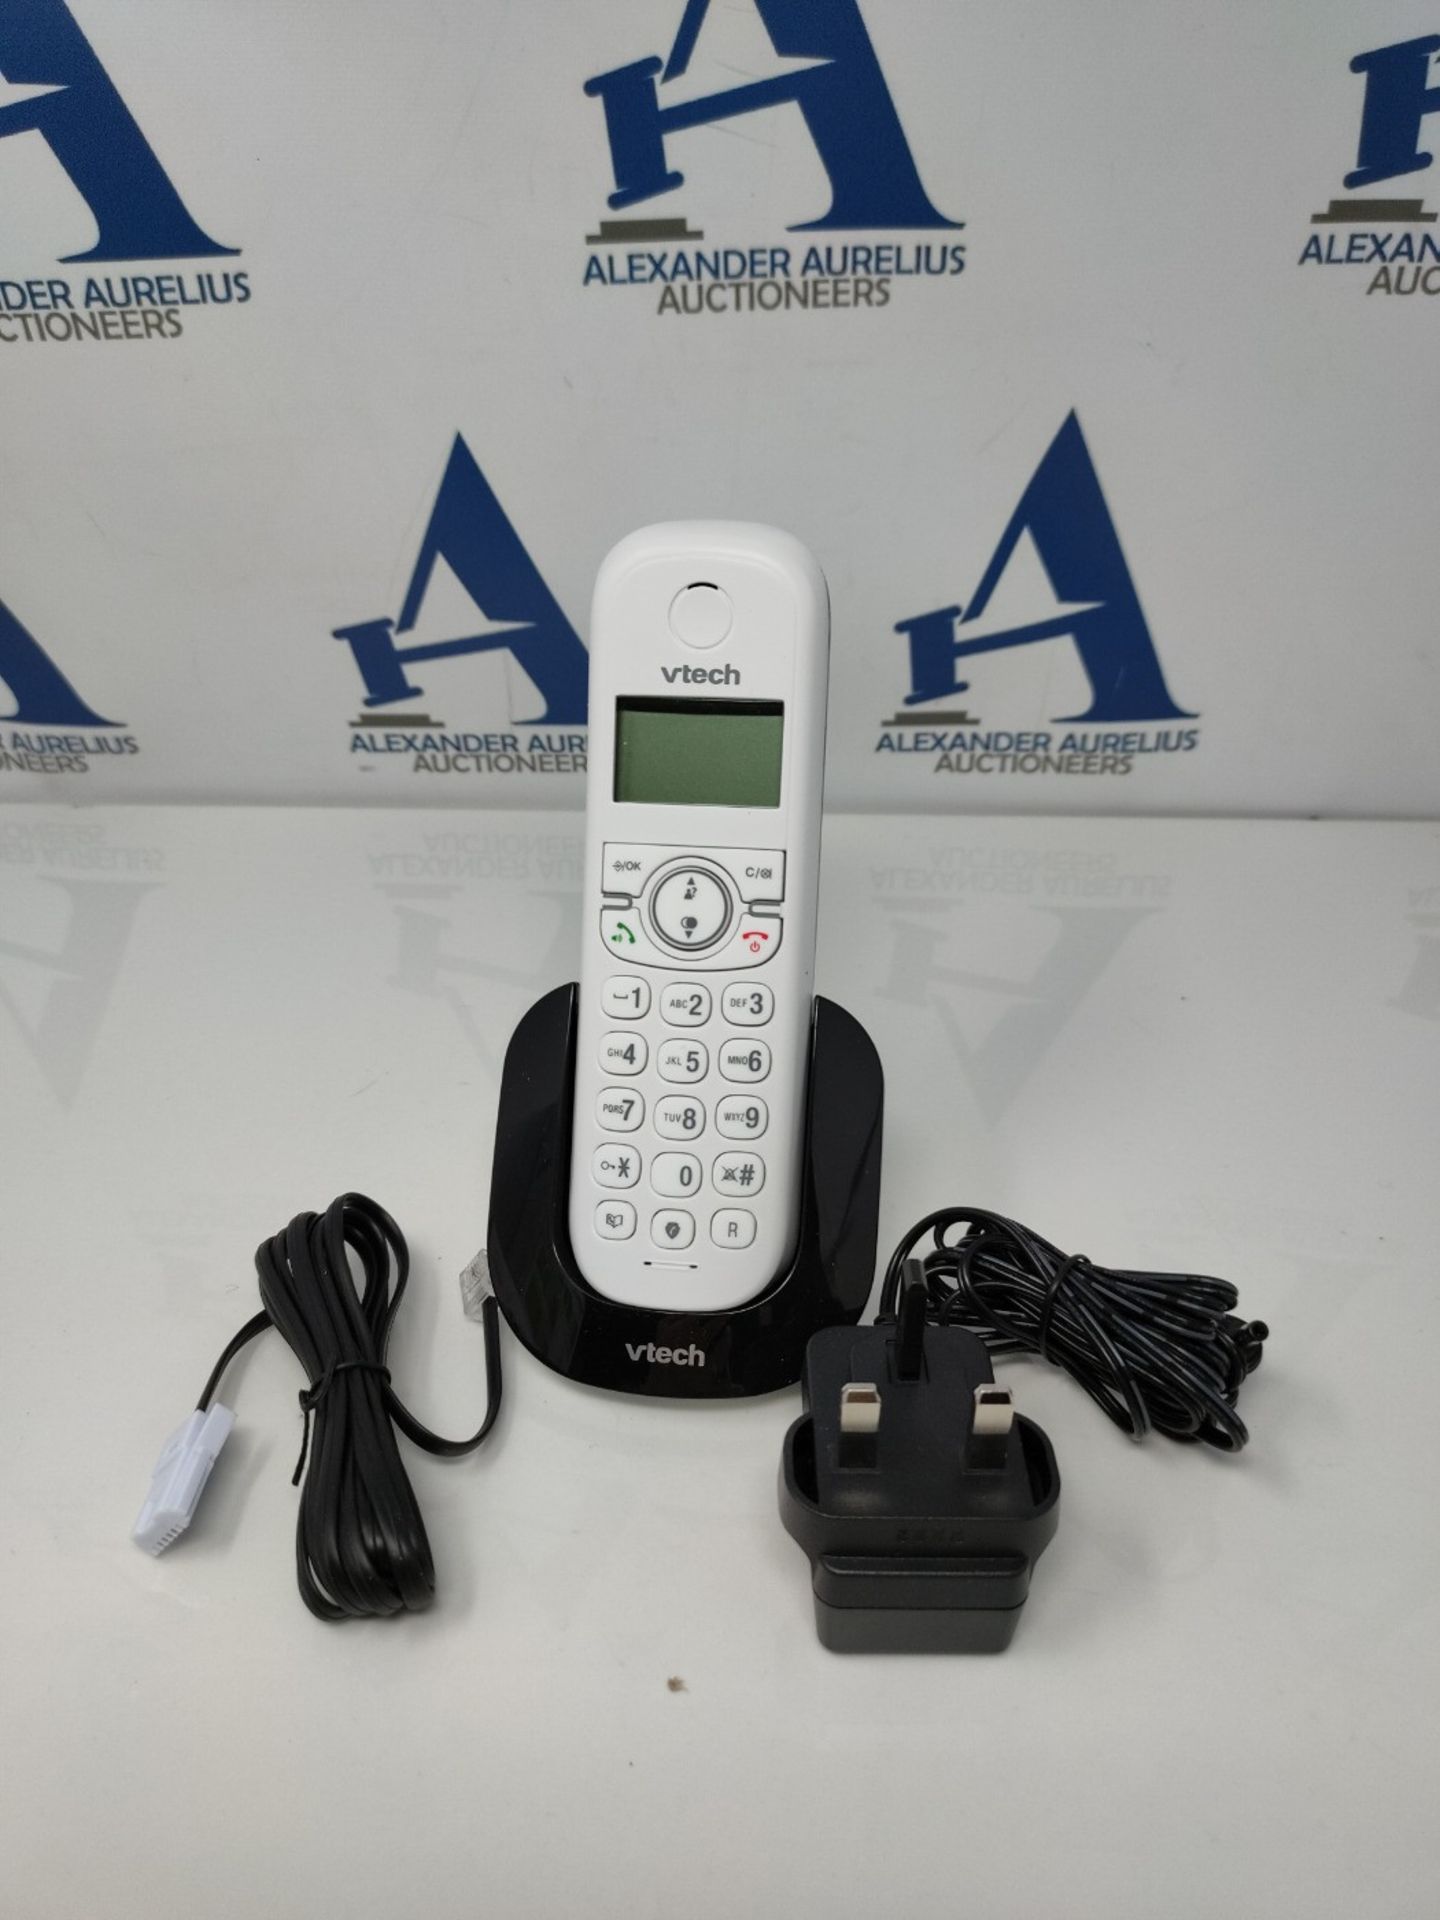 VTech CS1500 Dual-Charging DECT Cordless Phone with Call Block, Caller ID/Call Waiting - Image 3 of 3